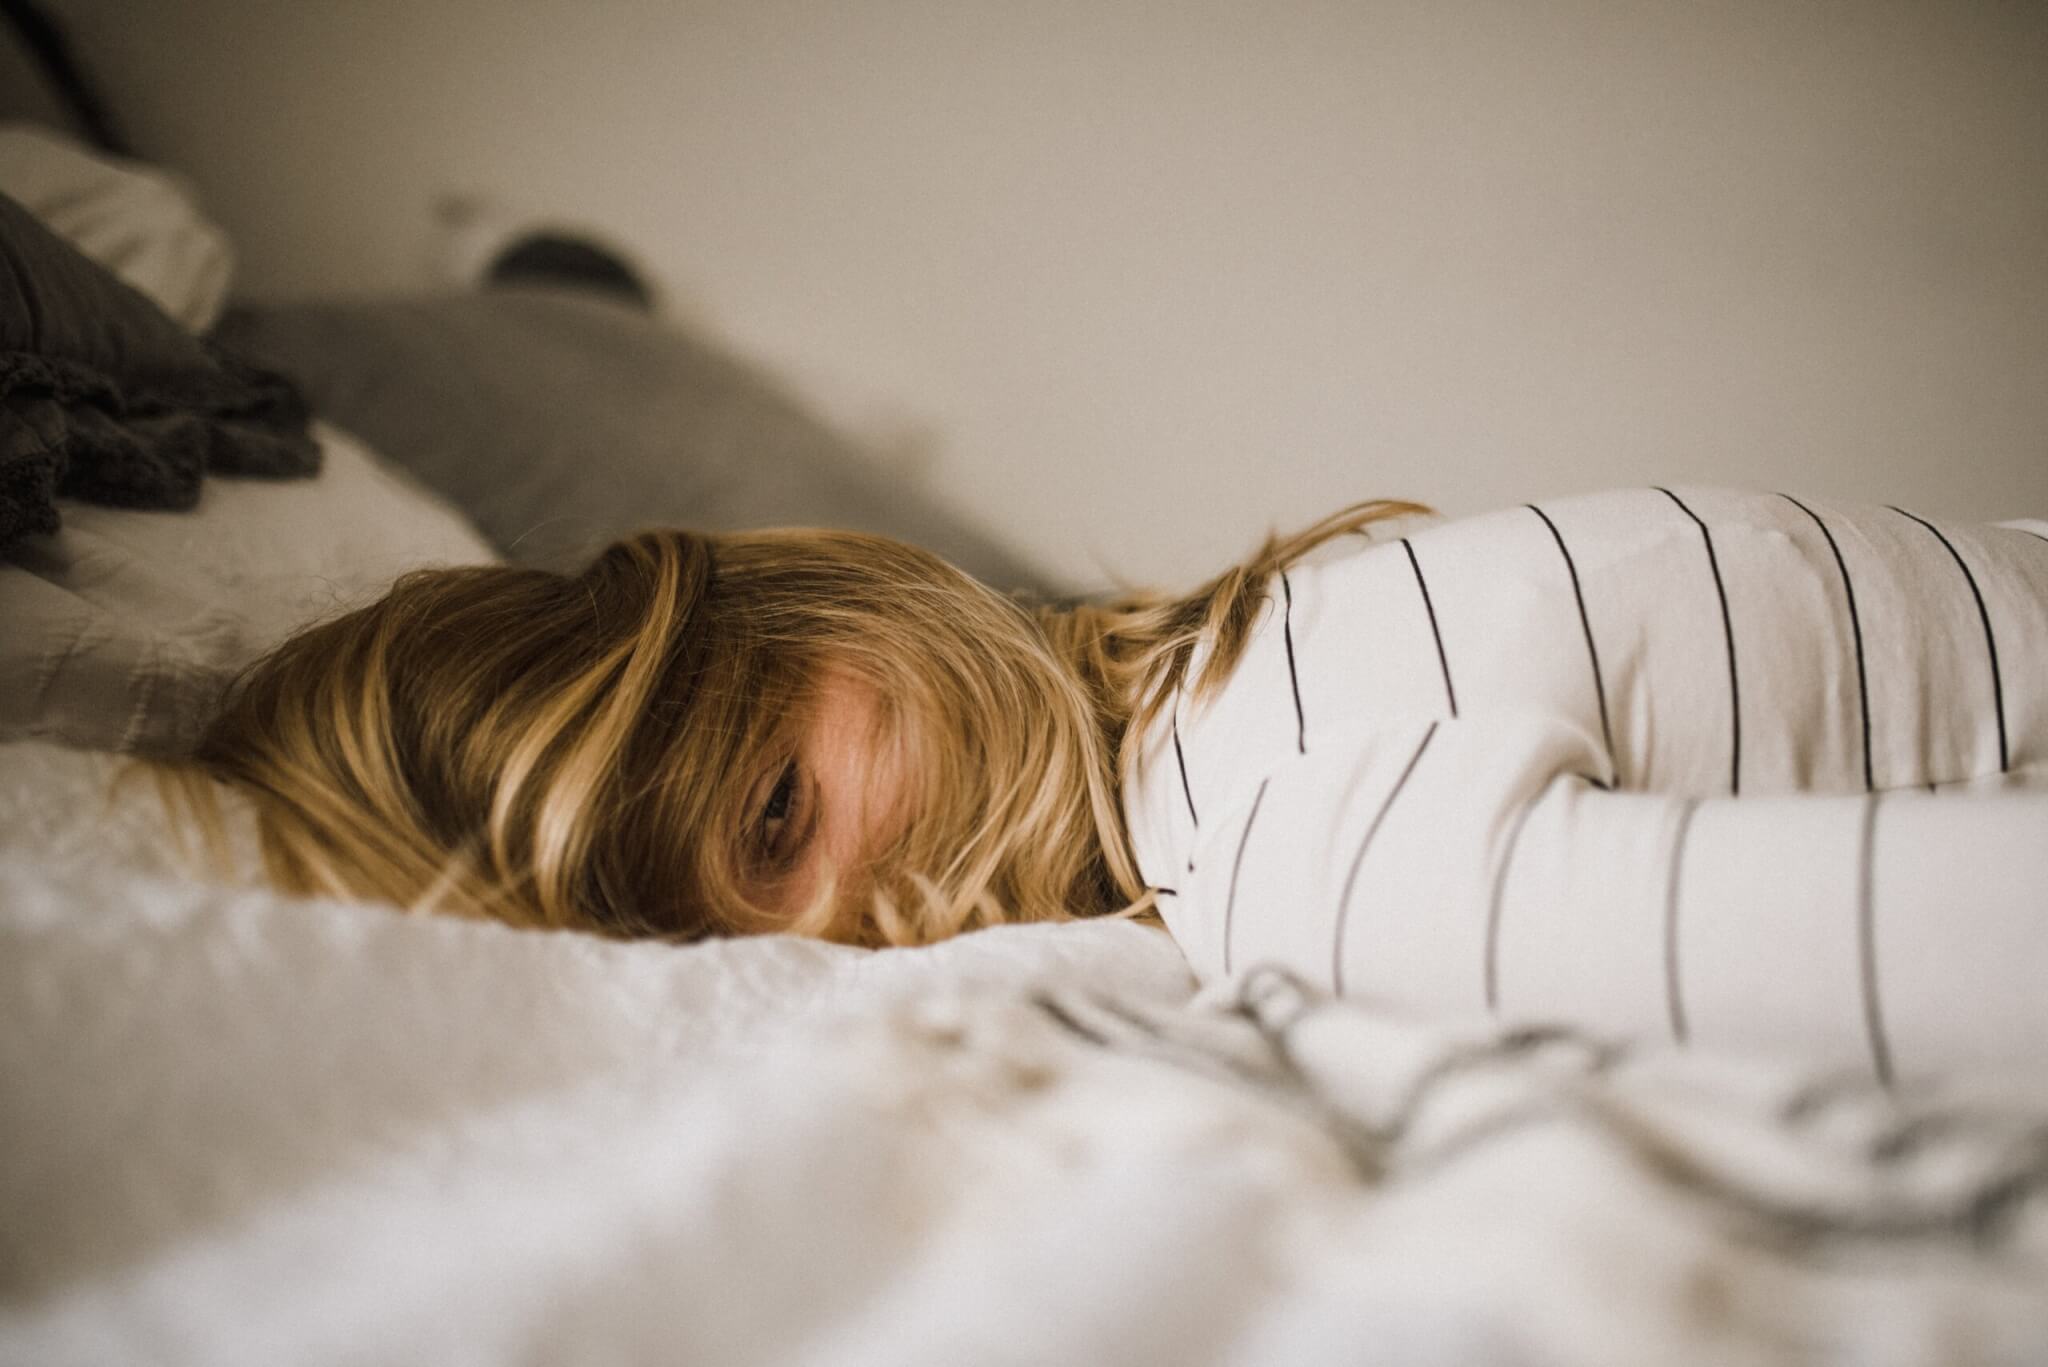 A blond girl lies face down on a bed, eyes mostly closed, hair sprawled over her face. She seems exhausted. 